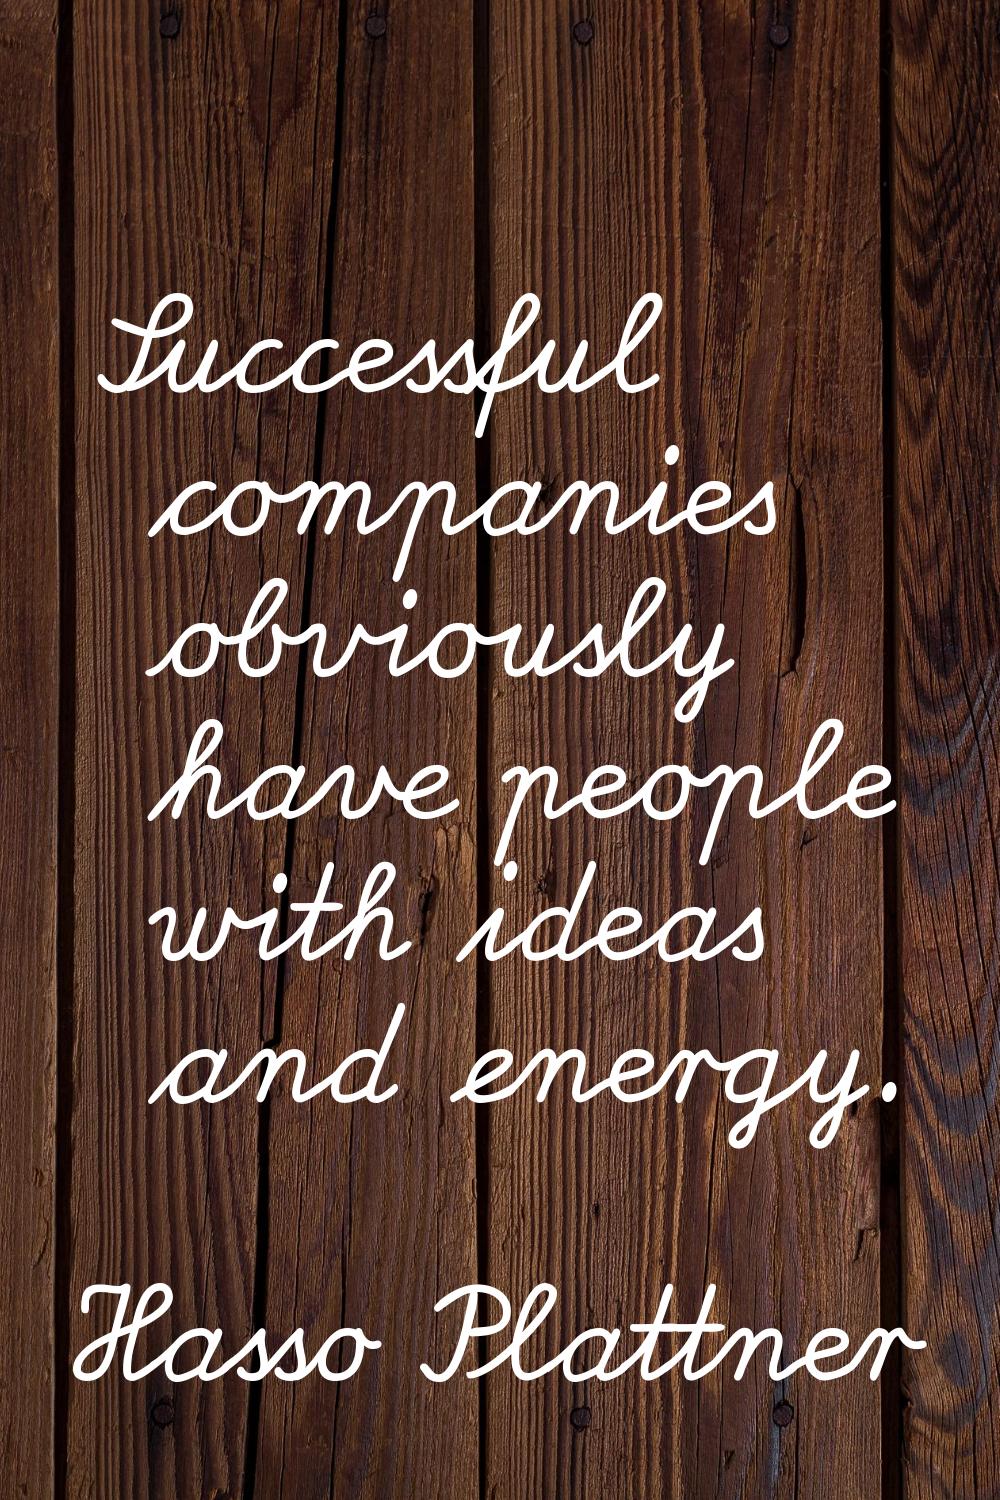 Successful companies obviously have people with ideas and energy.